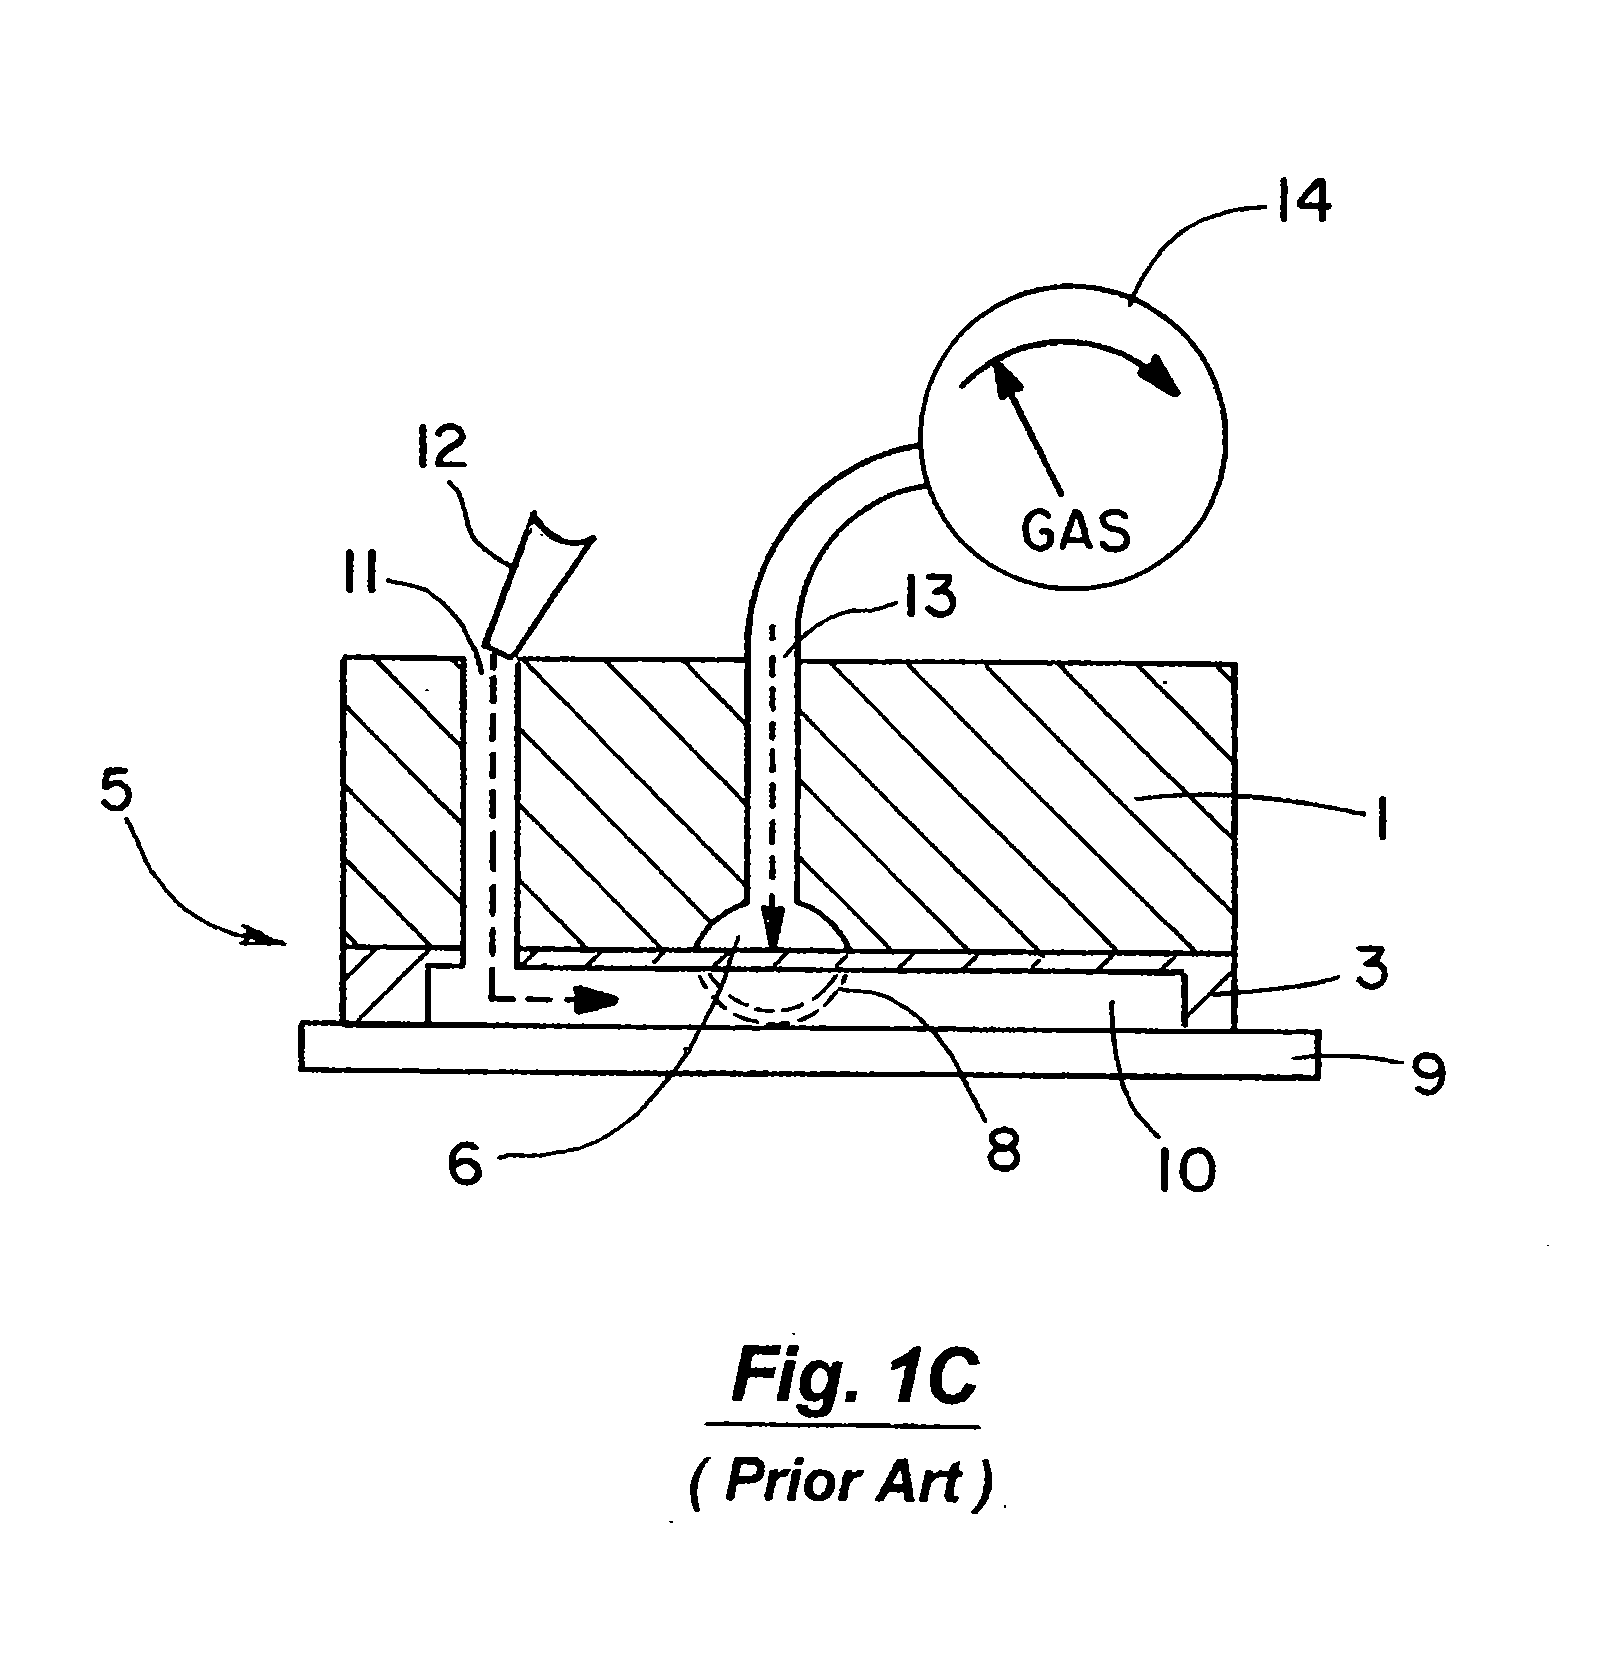 Integrated chip carriers with thermocycler interfaces and methods of using the same